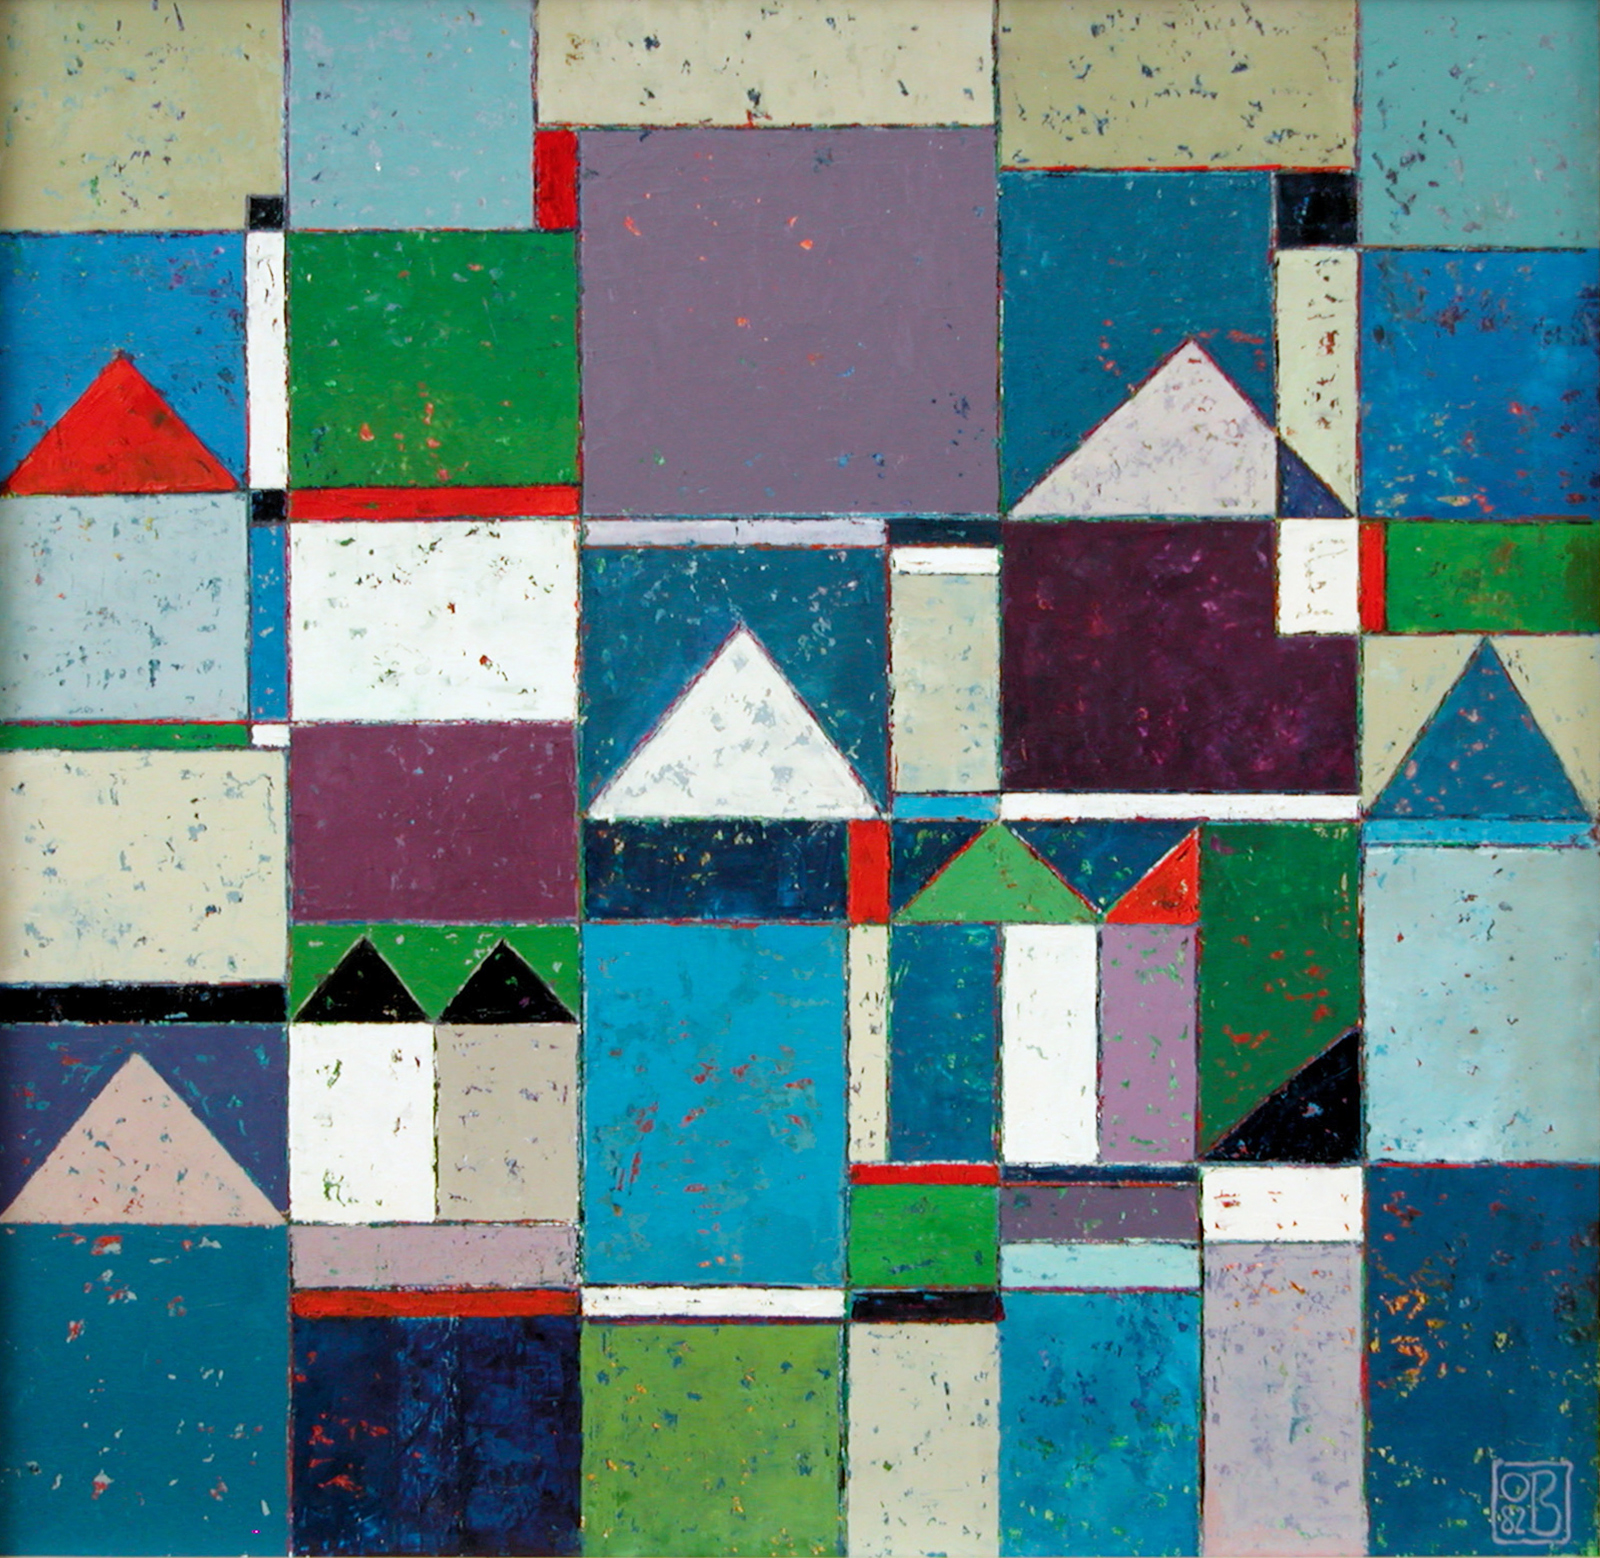 Otto Beyer's Town Scape No. 2 is a colourful abstract painting of angled shapes in a grid formation